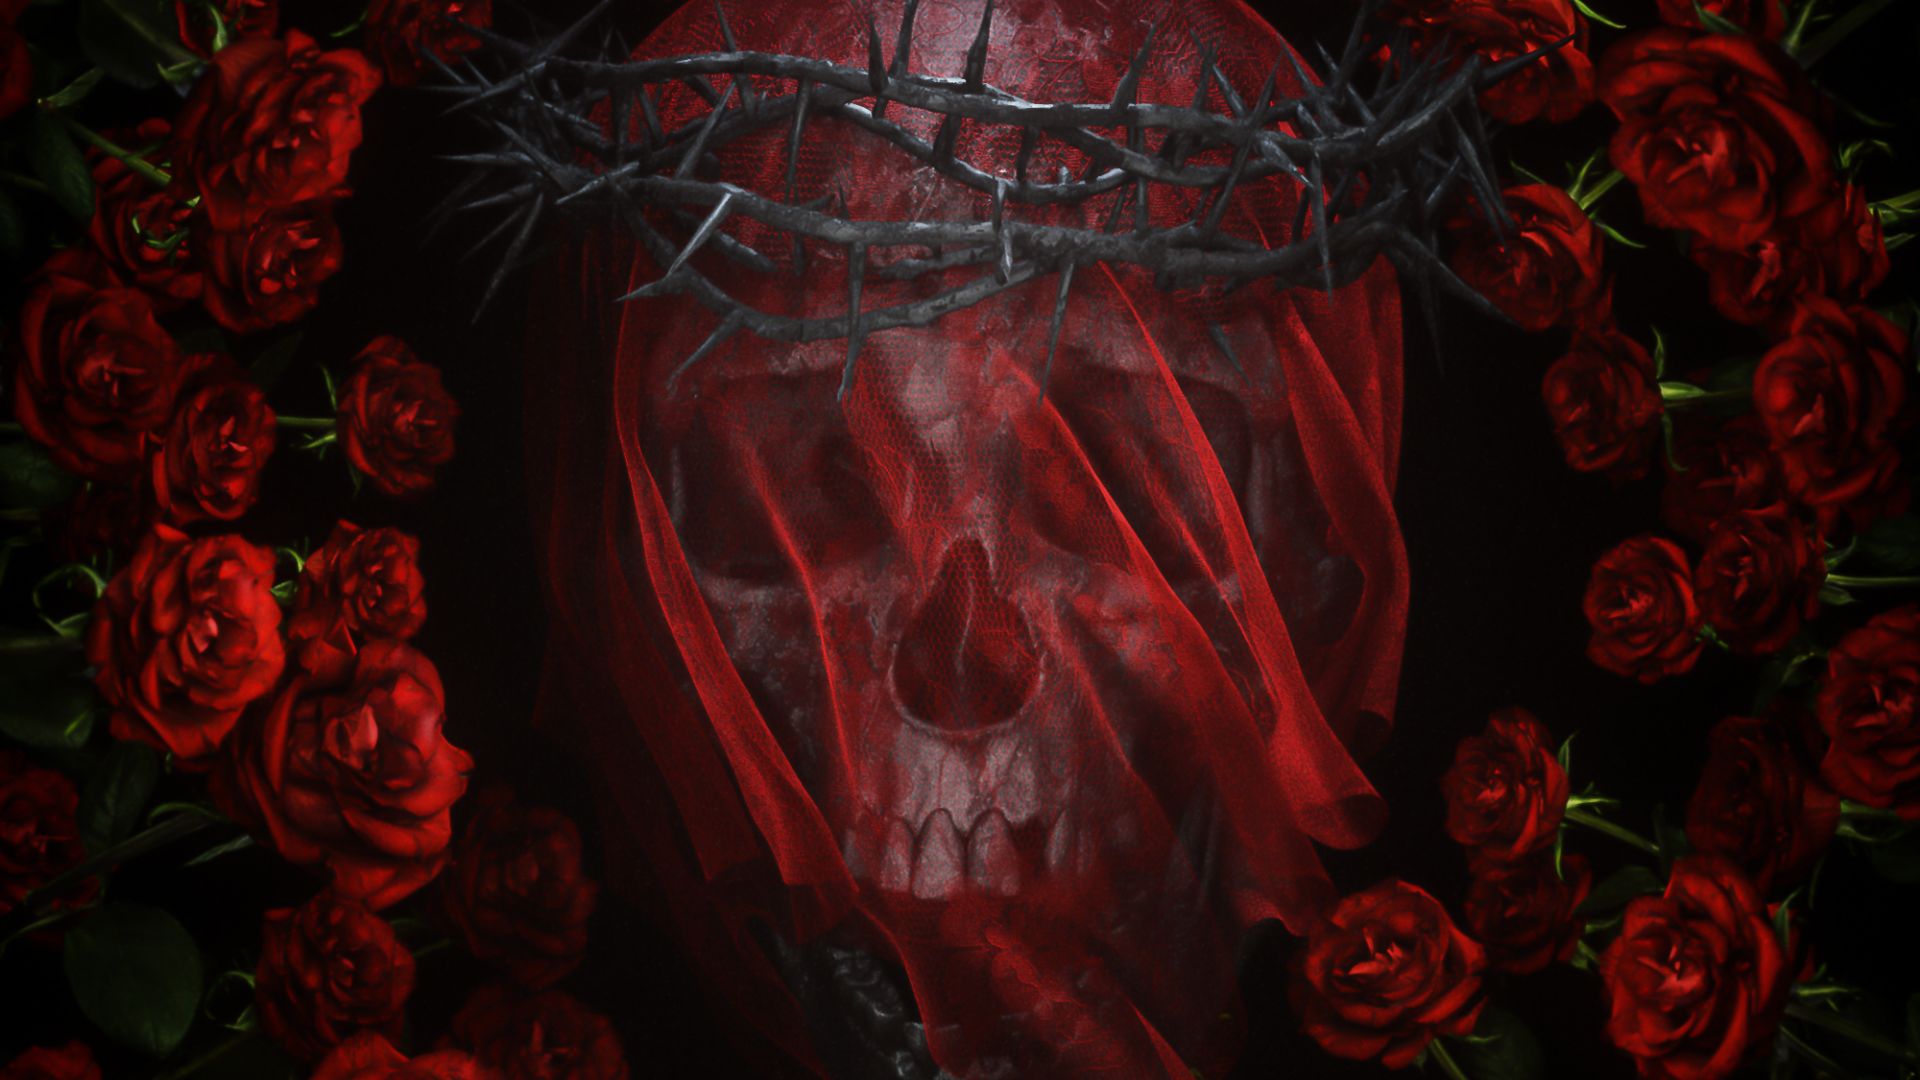 Desktop wallpapers skull and roses, artwork, hd image, picture, background,...